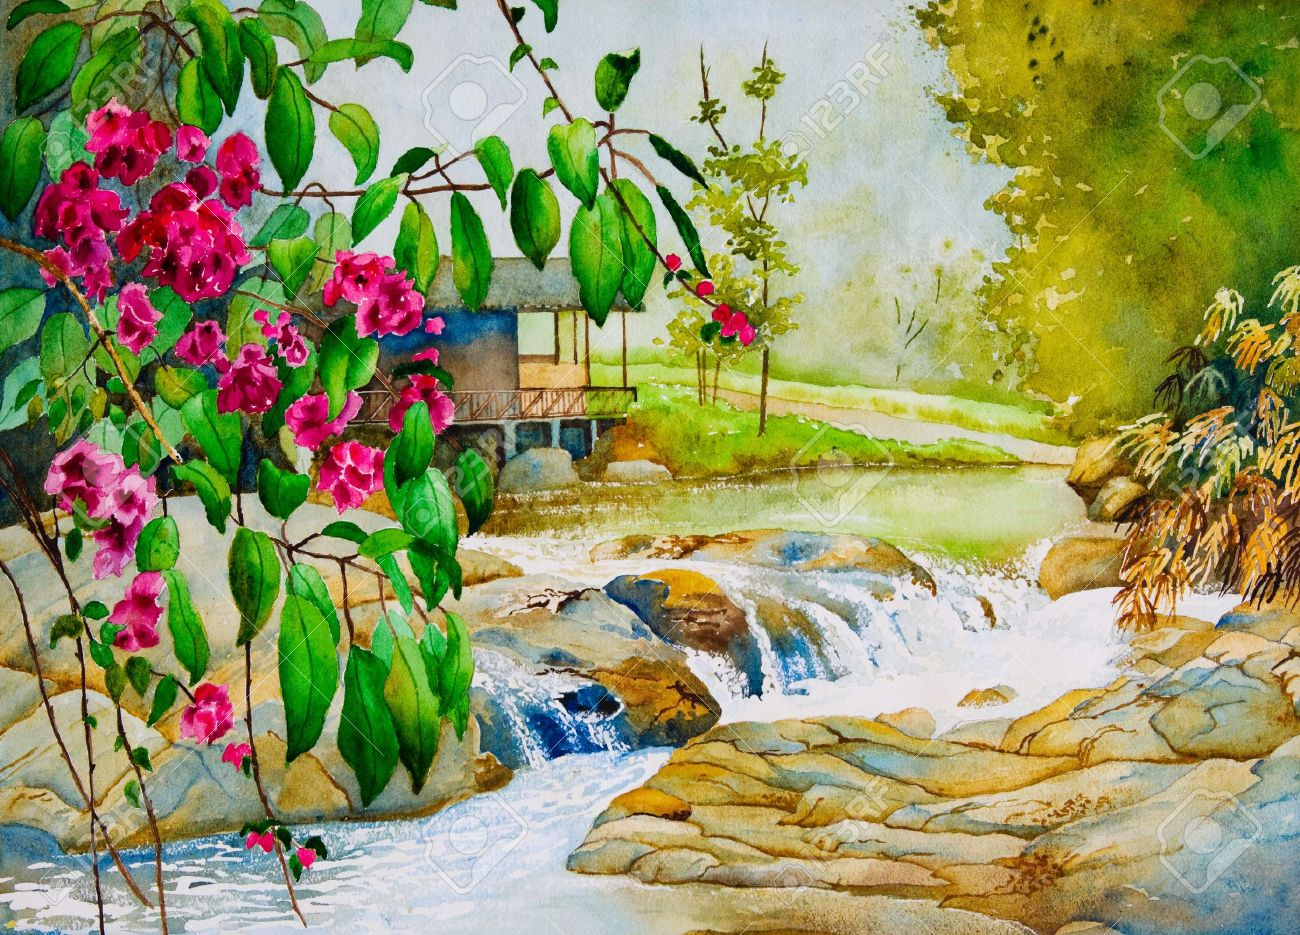 Beautiful Watercolor Paintings Of Nature at PaintingValley.com